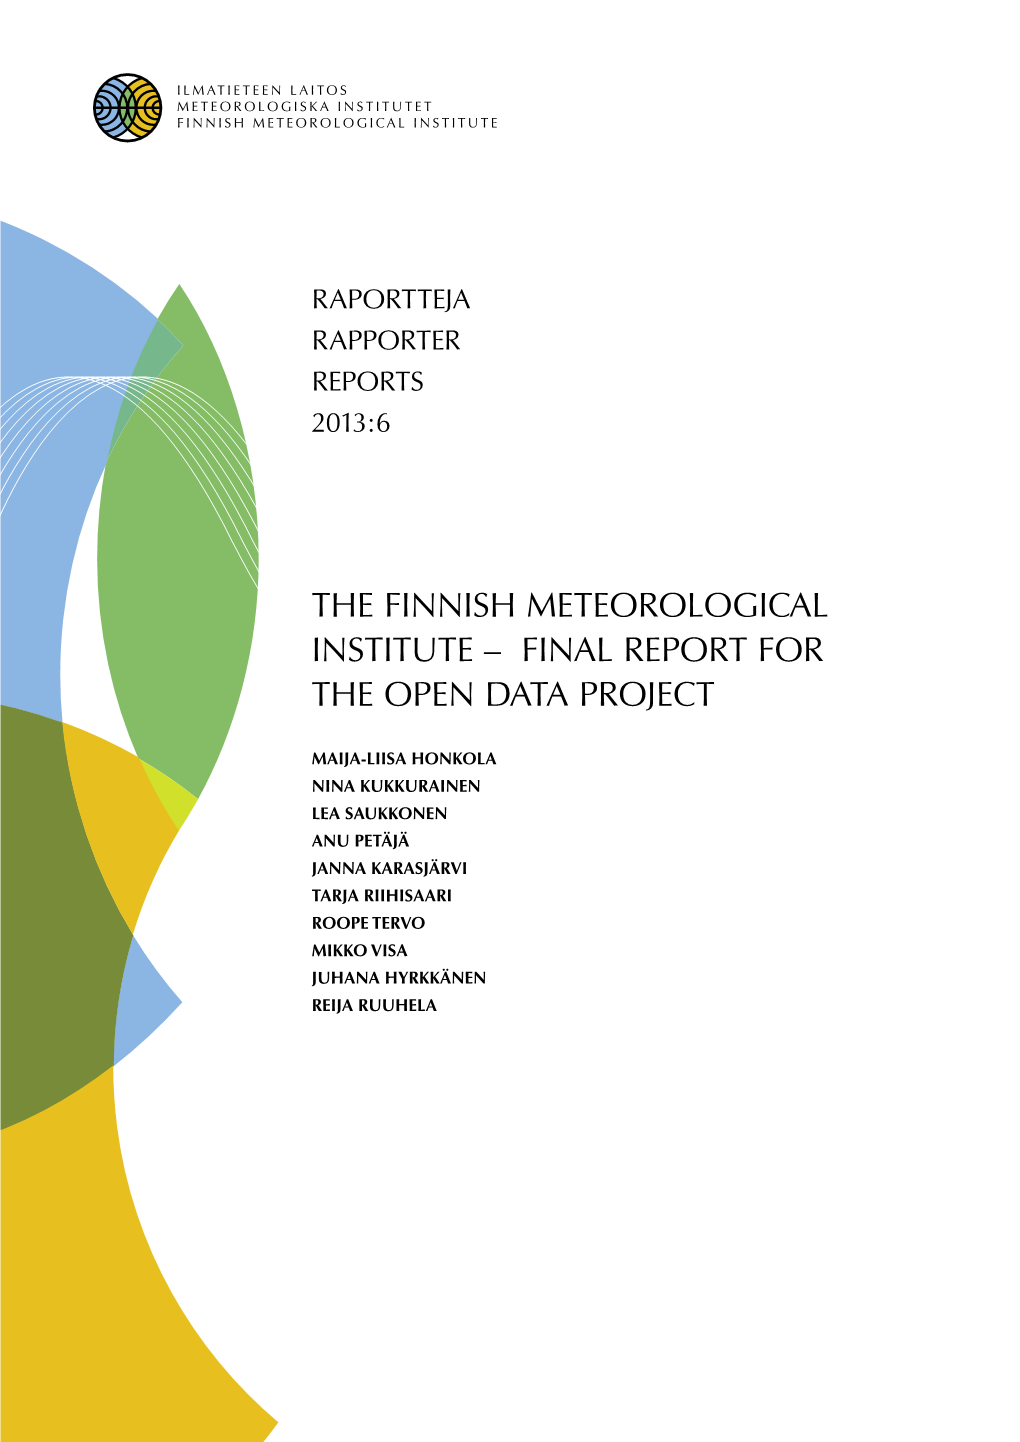 The Finnish Meteorological Institute – Final Report for the Open Data Project